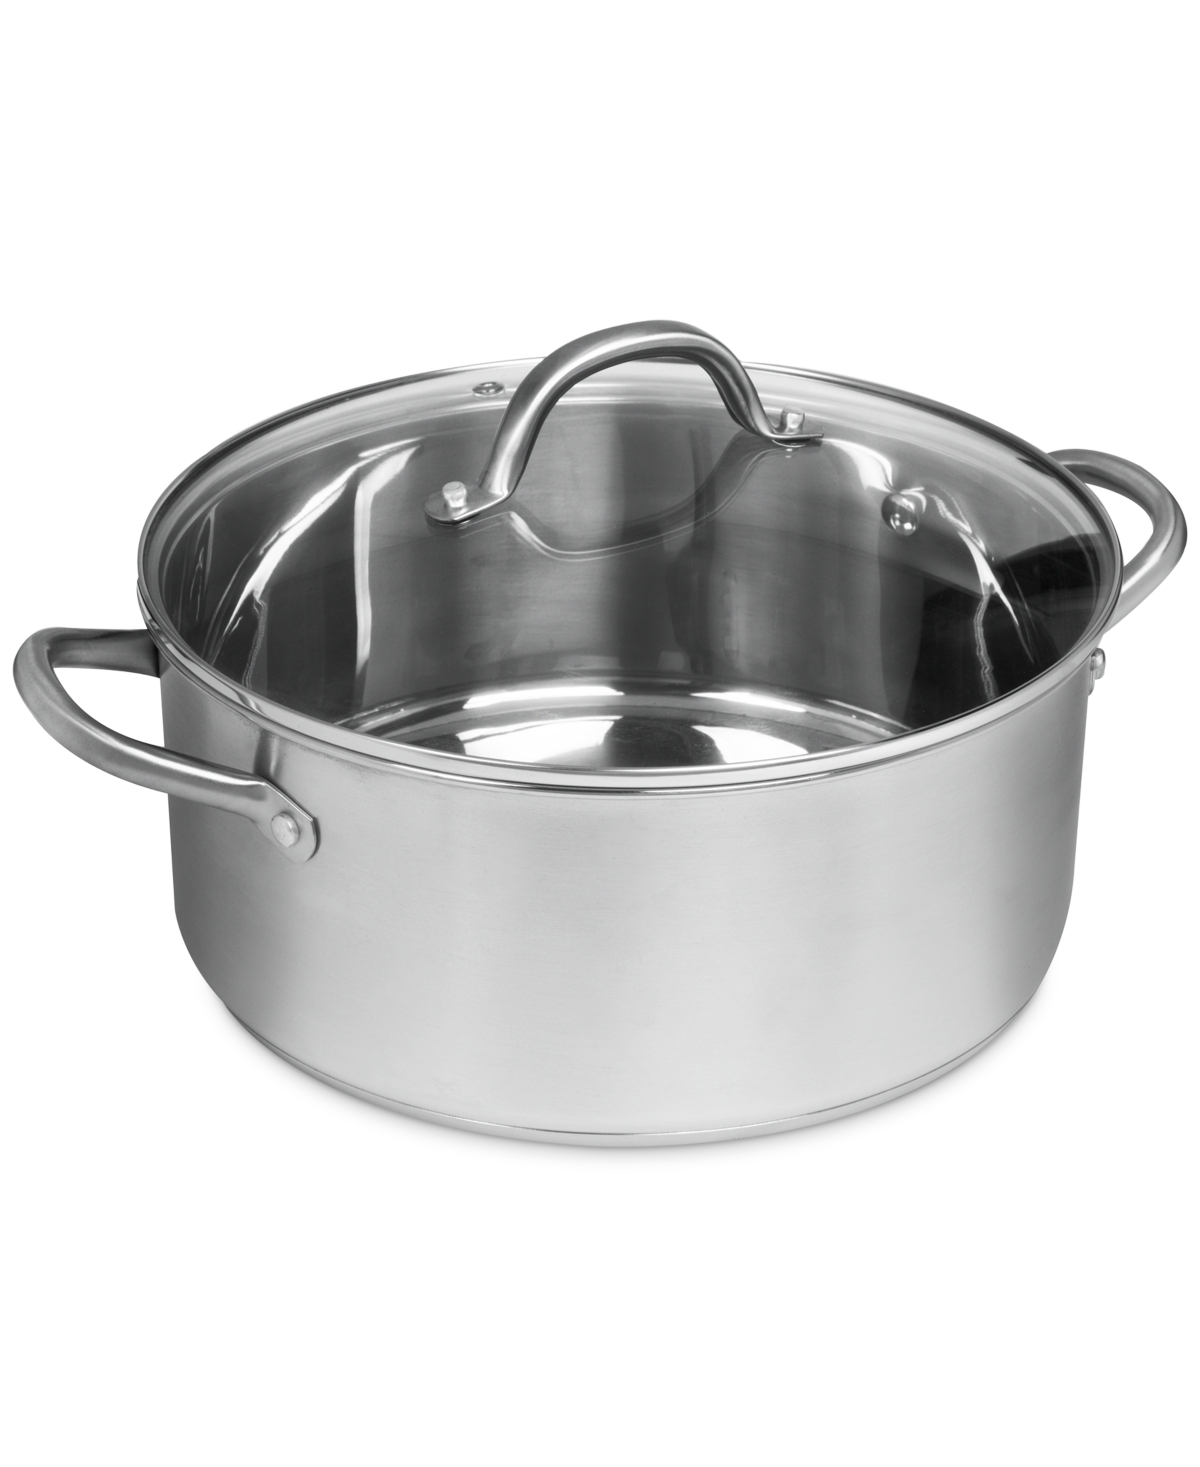 Mainstays Stainless Steel 5-Quart Dutch Oven with Glass Lid 